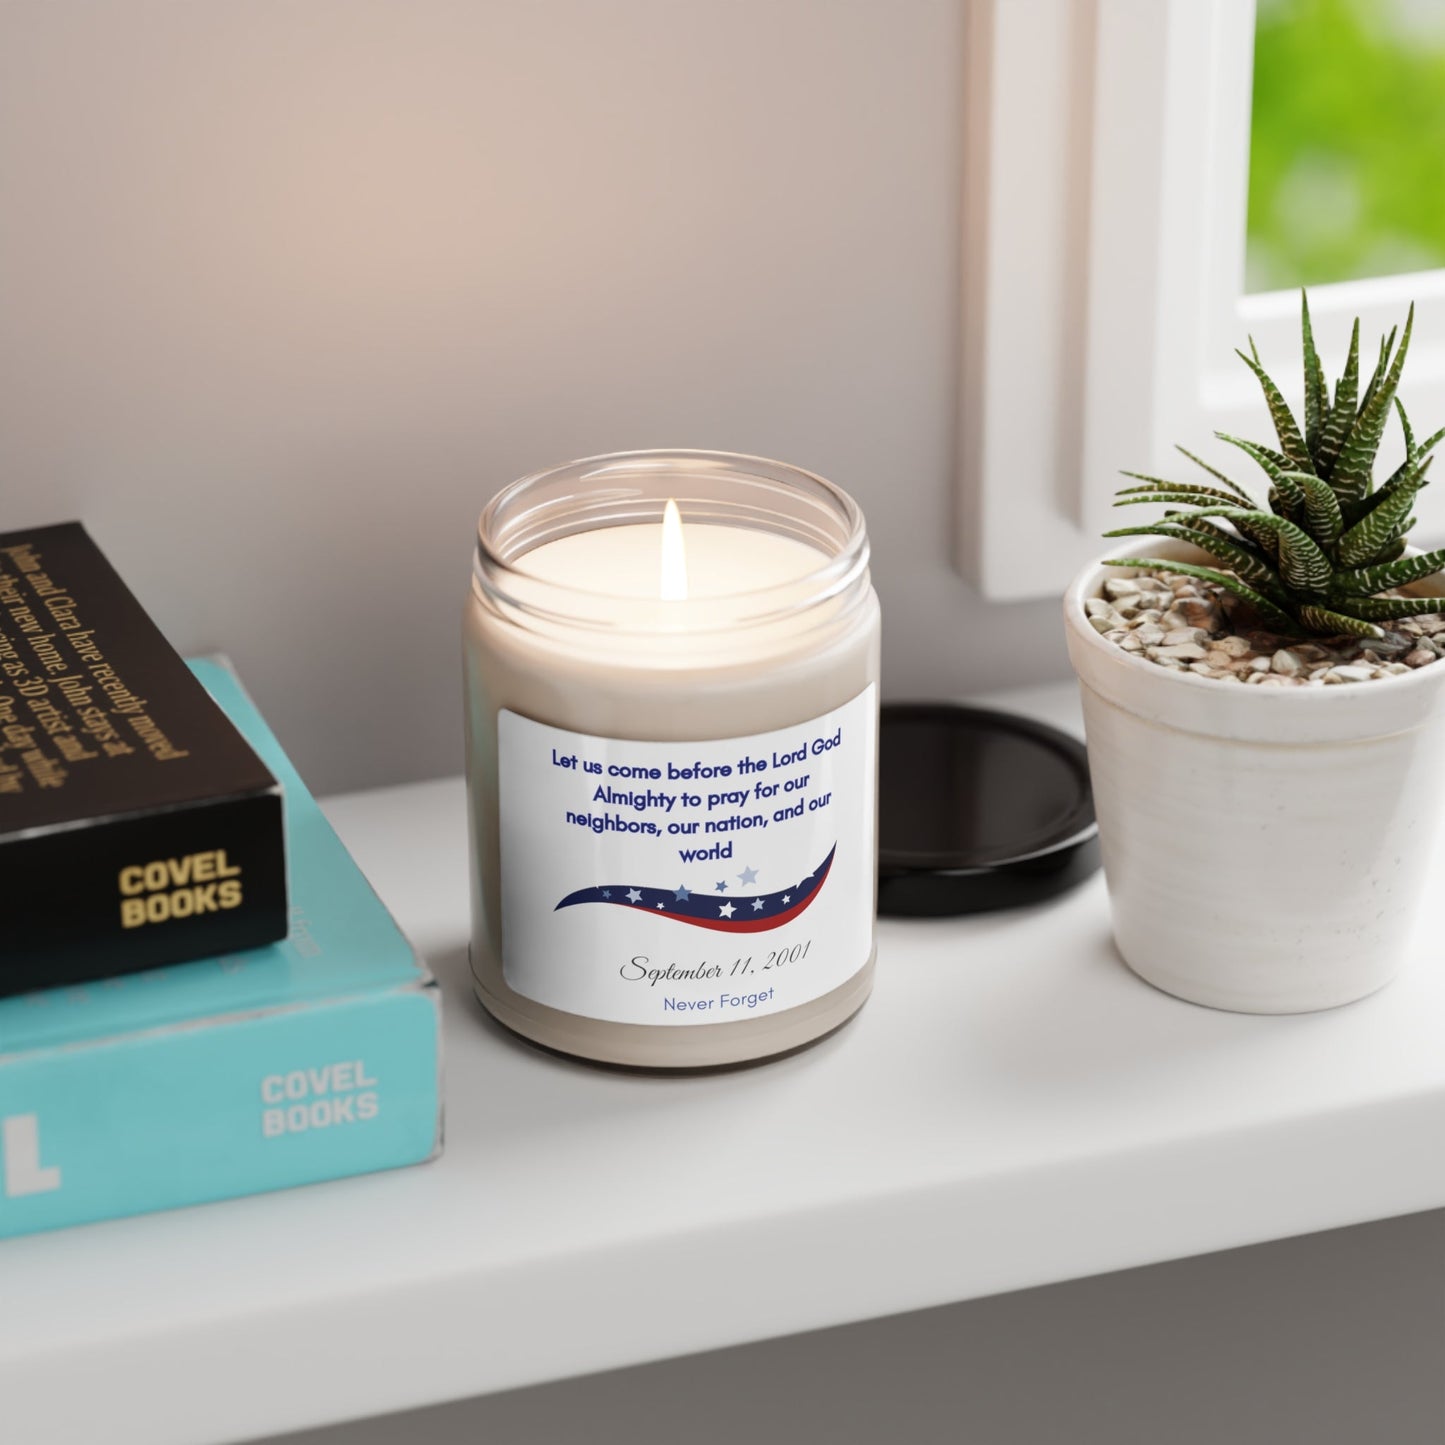 Get trendy with September 11 Remembrance prayer Scented Soy Candle, 9oz - Home Decor available at Good Gift Company. Grab yours for $16 today!